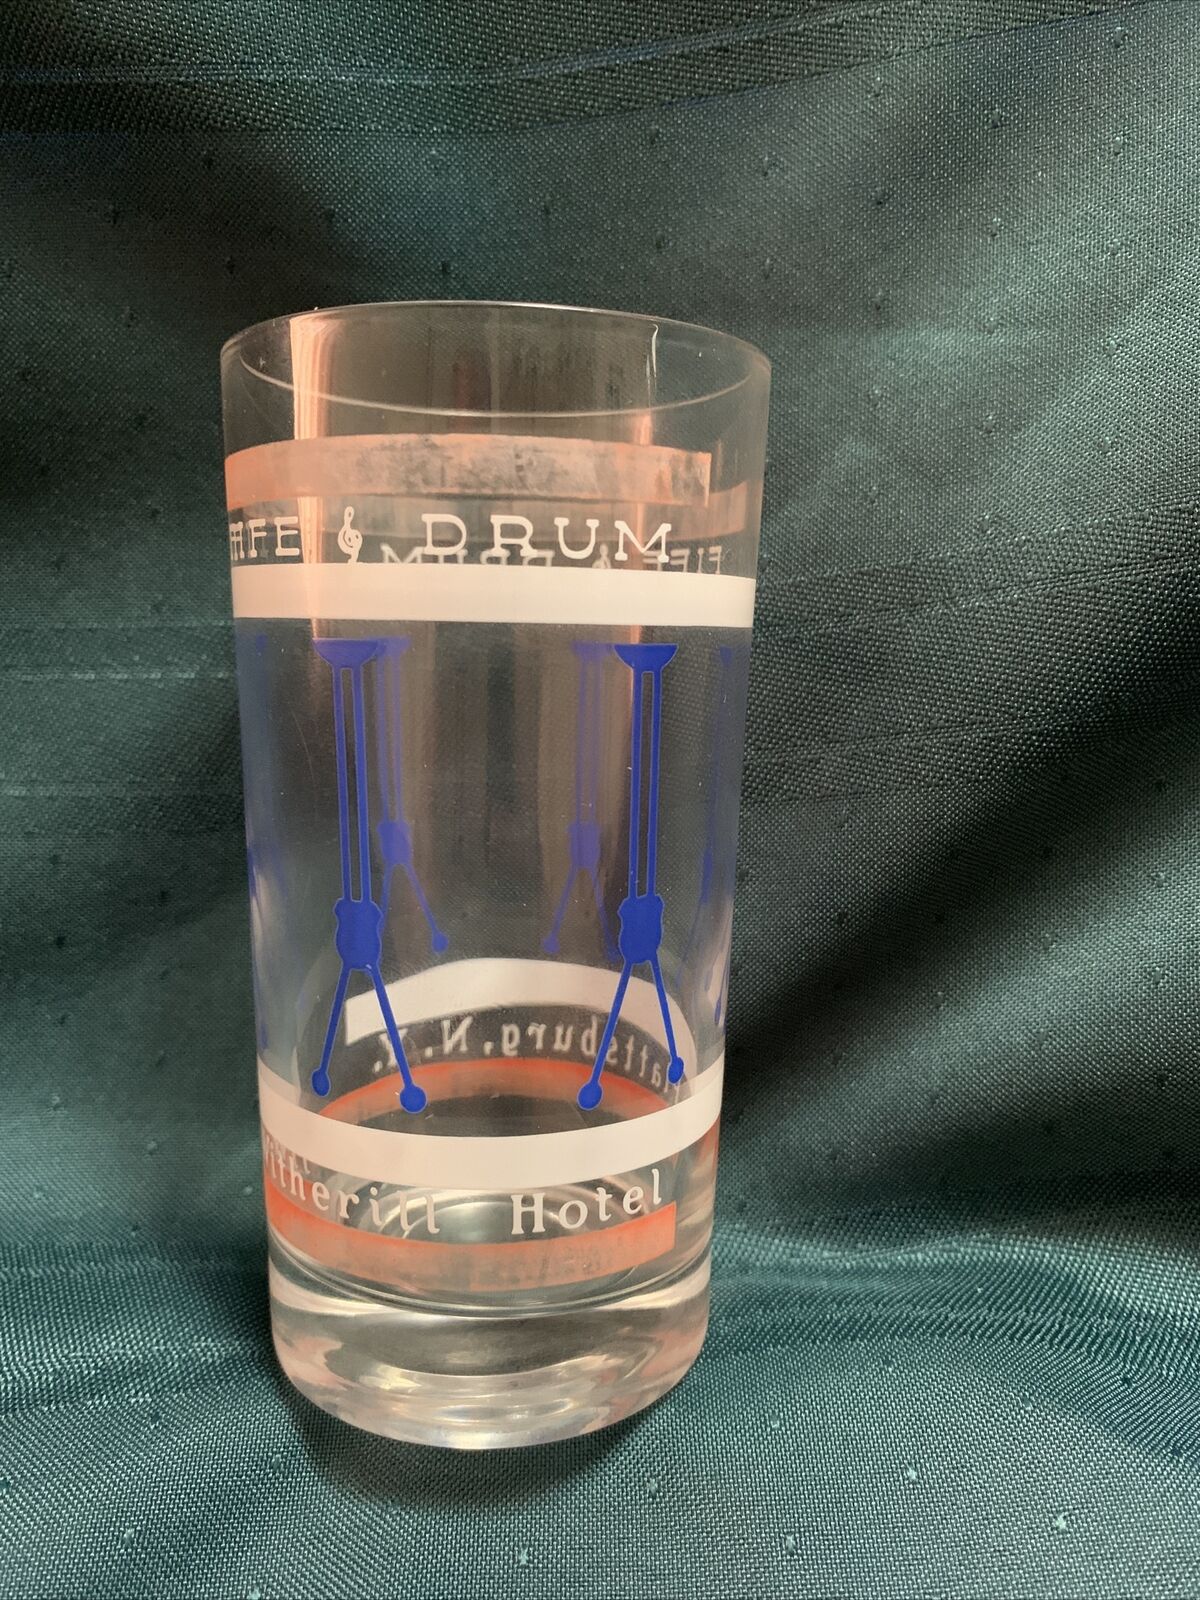 FIFE AND DRUM RESTAURANT WITHERILL HOTEL PLATTSBURG NY DRINKING GLASS